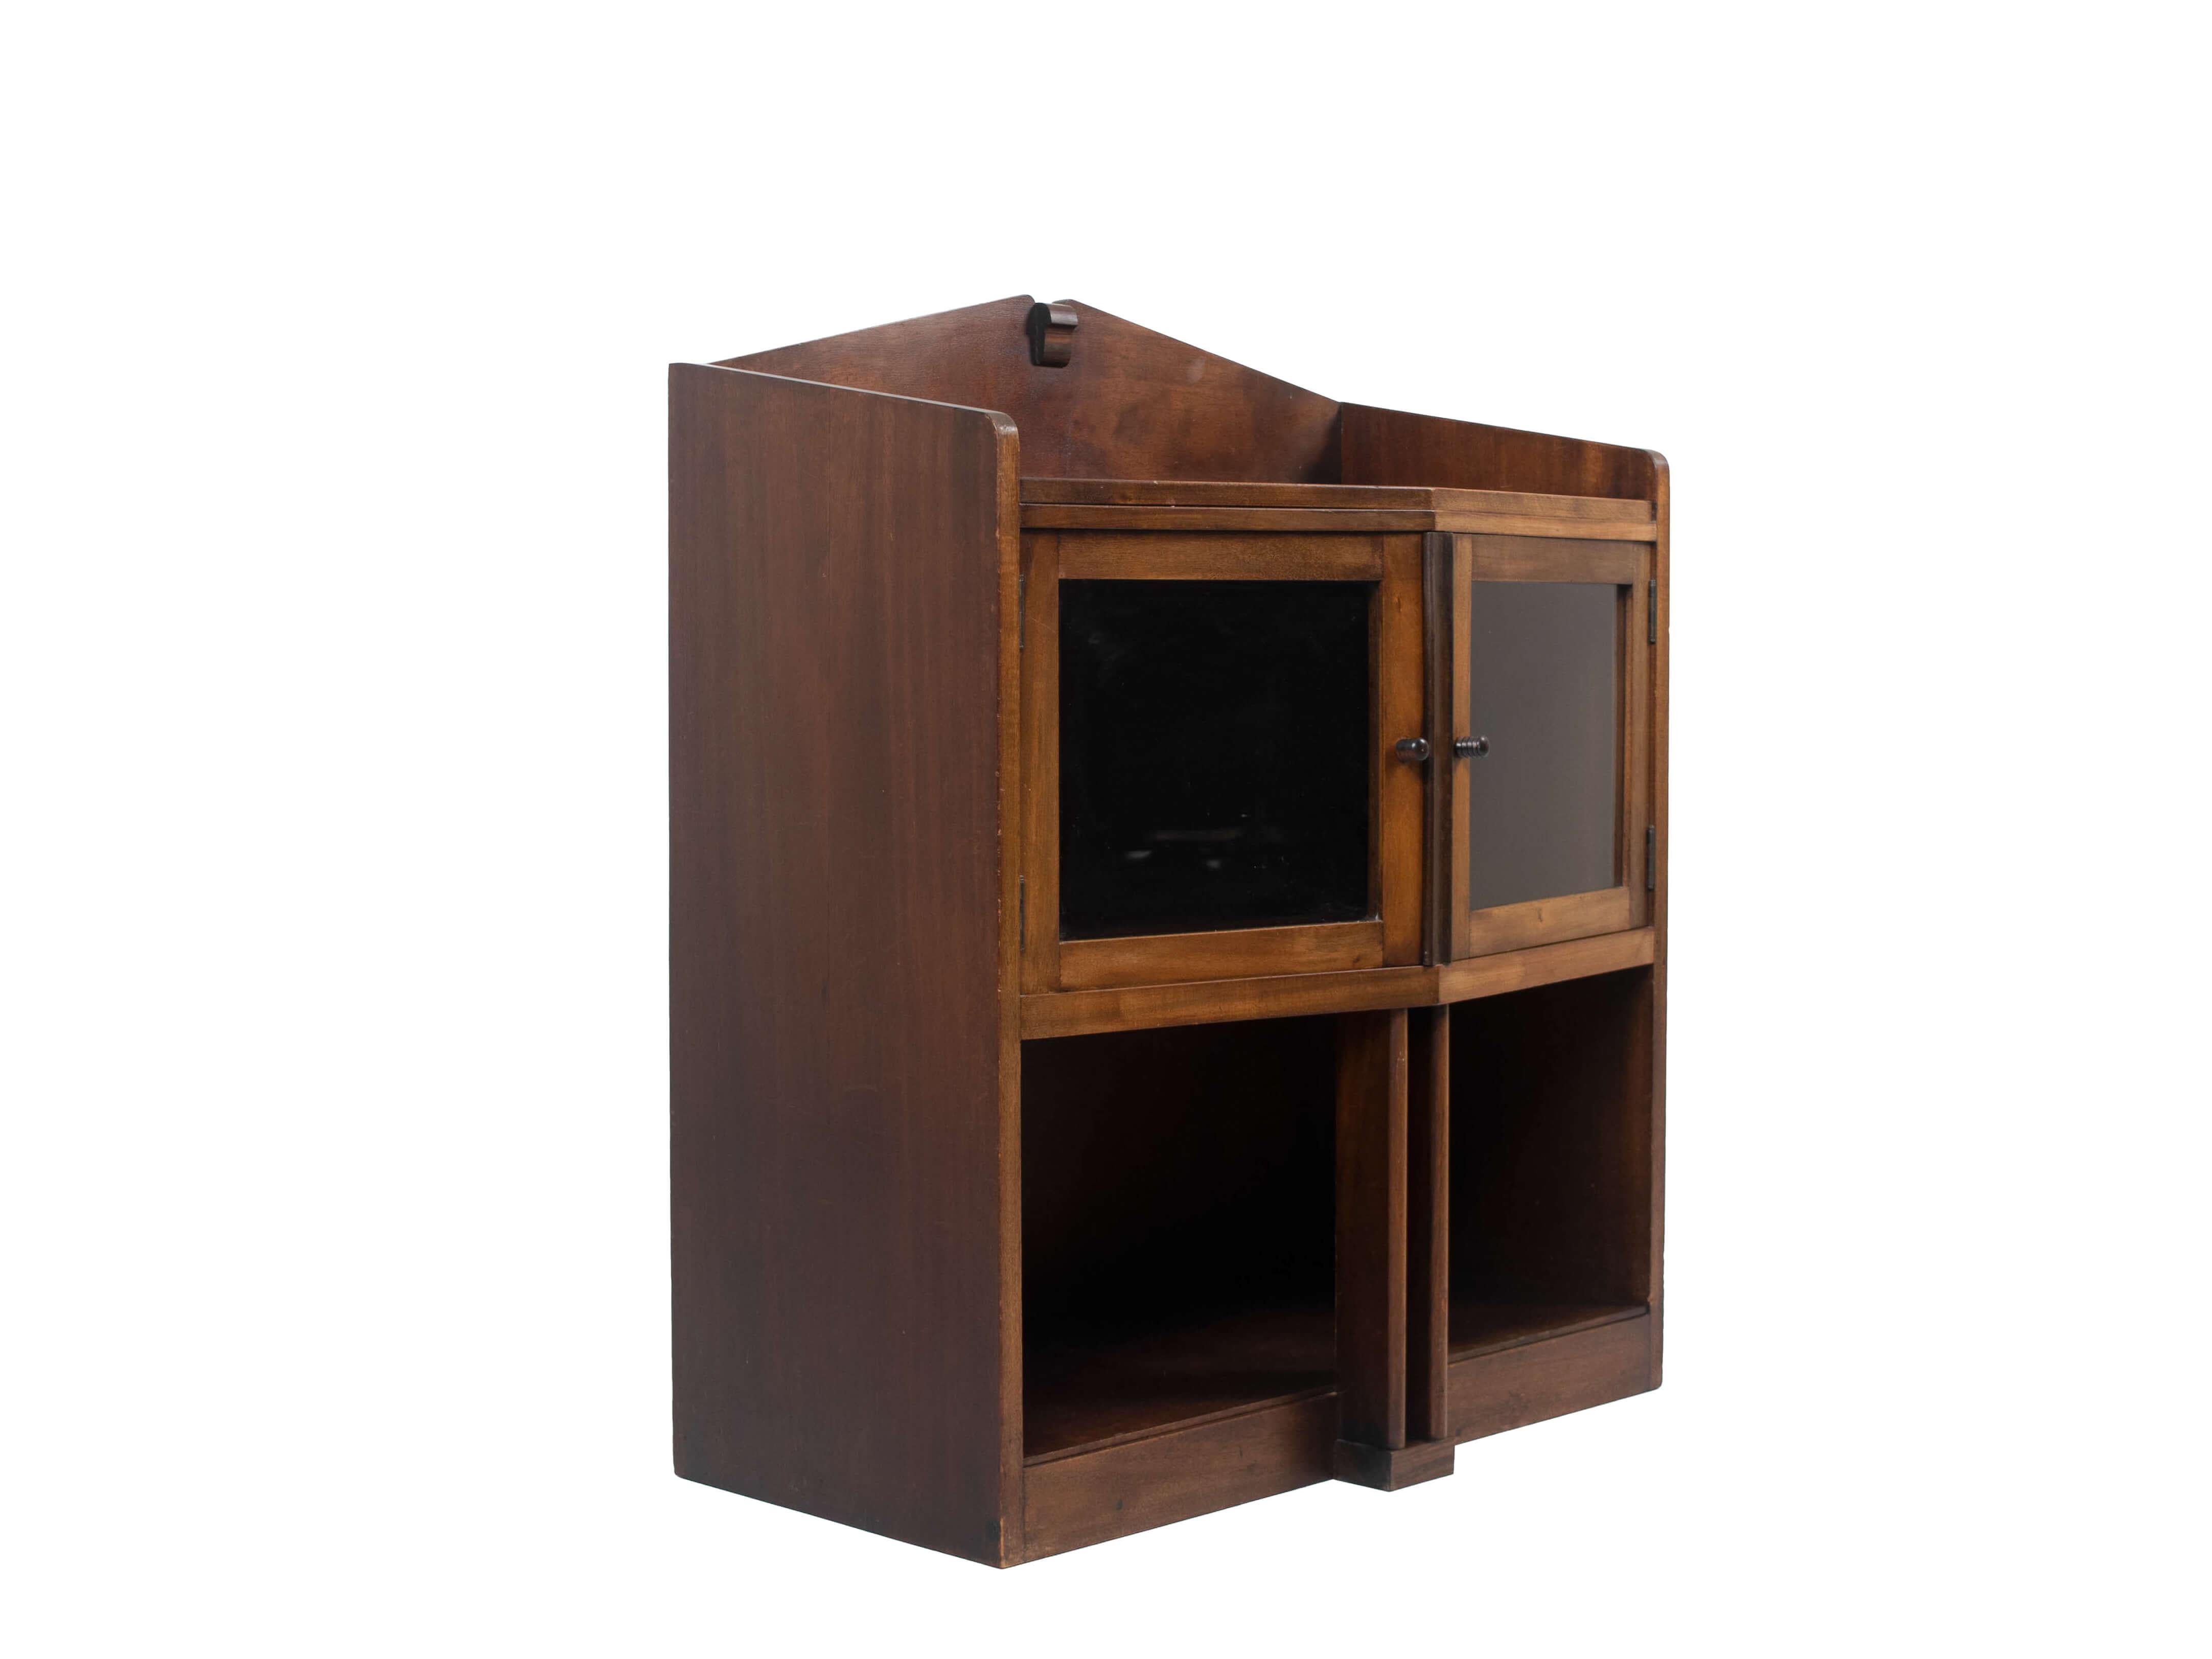 Nice Amsterdam School tea cabinet from The Netherlands 1930s. This cabinet has an attractive design with two glass doors on top and a shelve on the bottom. It has recognizable details for Dutch Design in the Art Deco period. The cabinet is in good